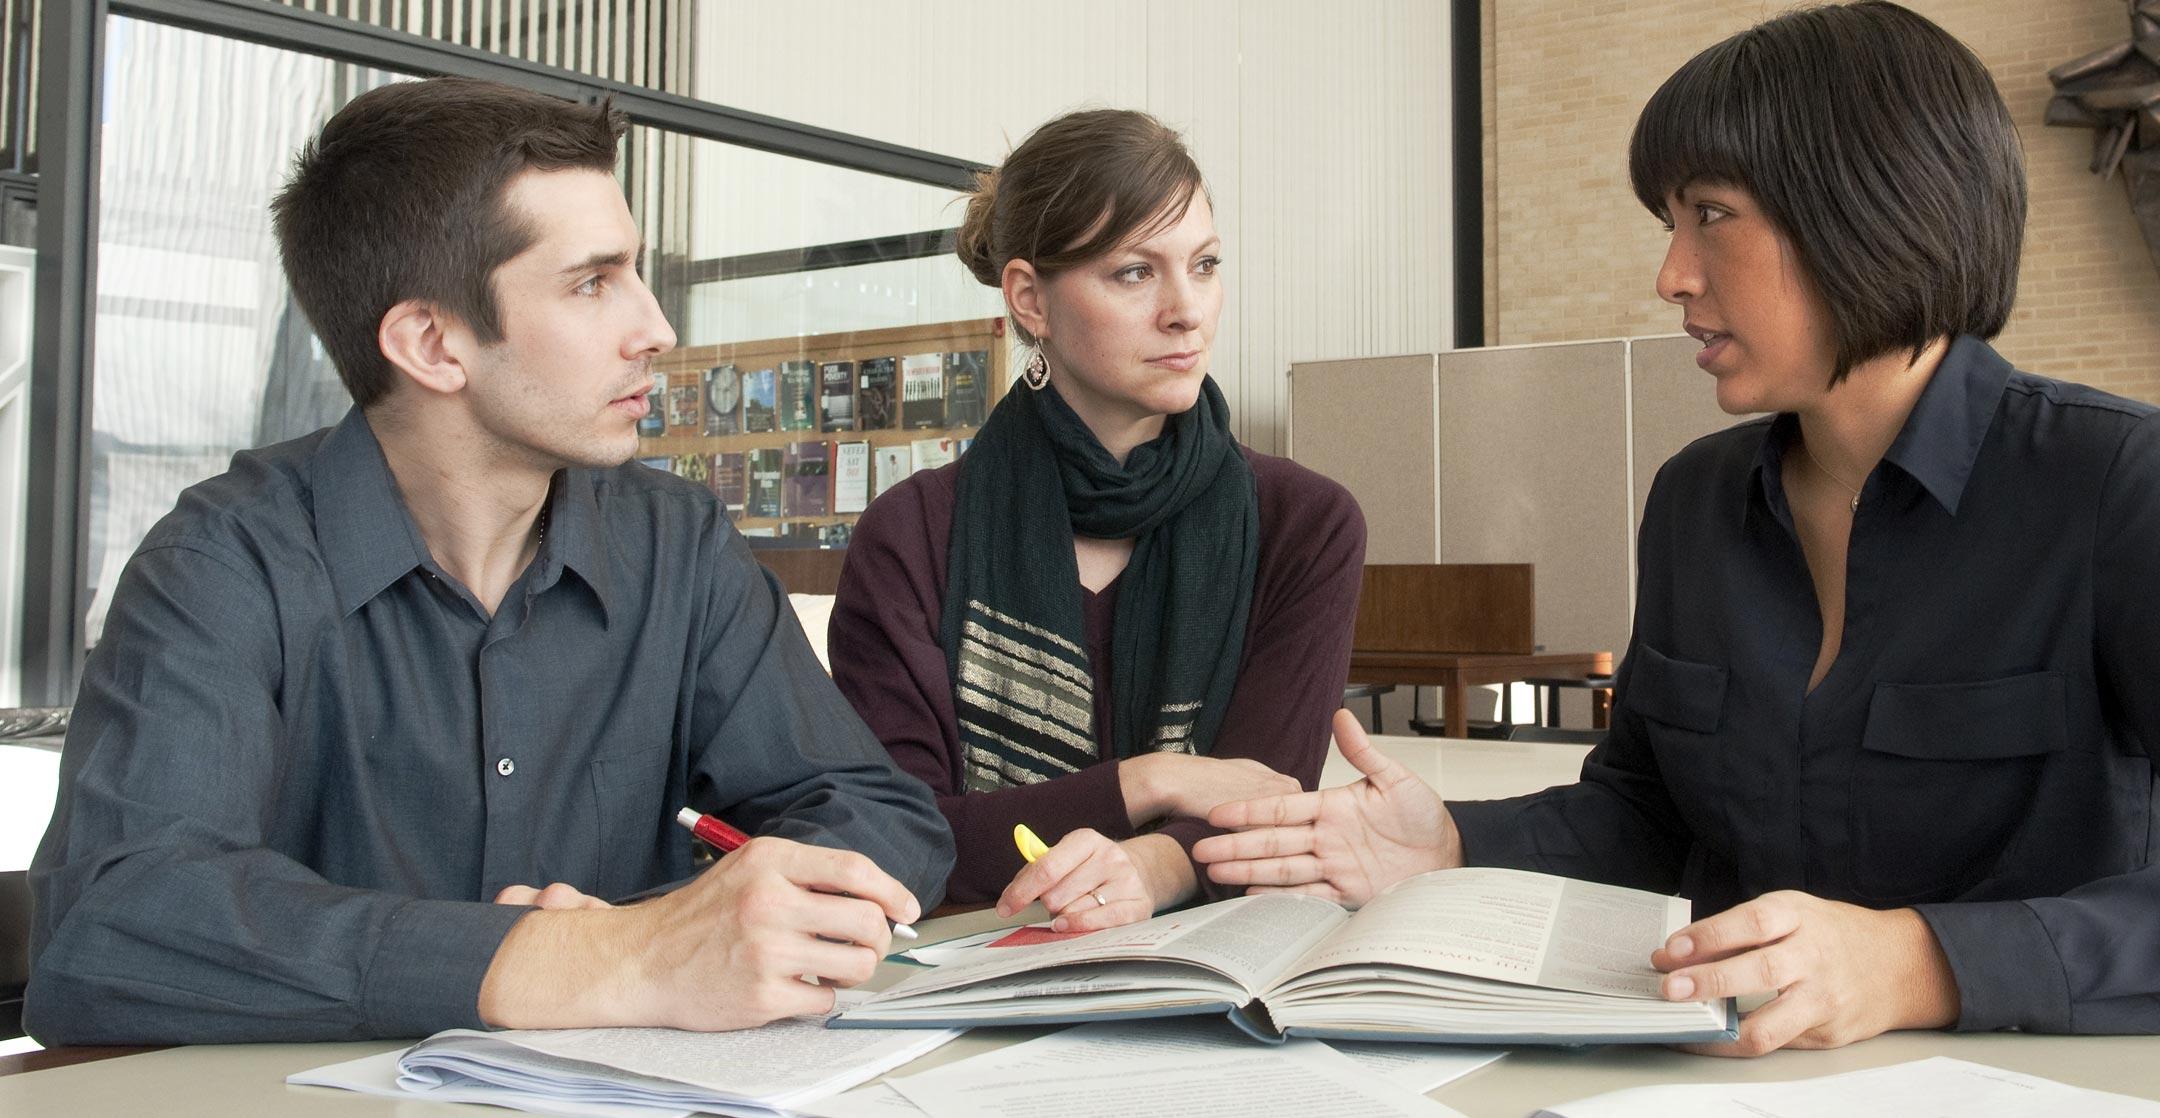 Three people talking with a book open between them